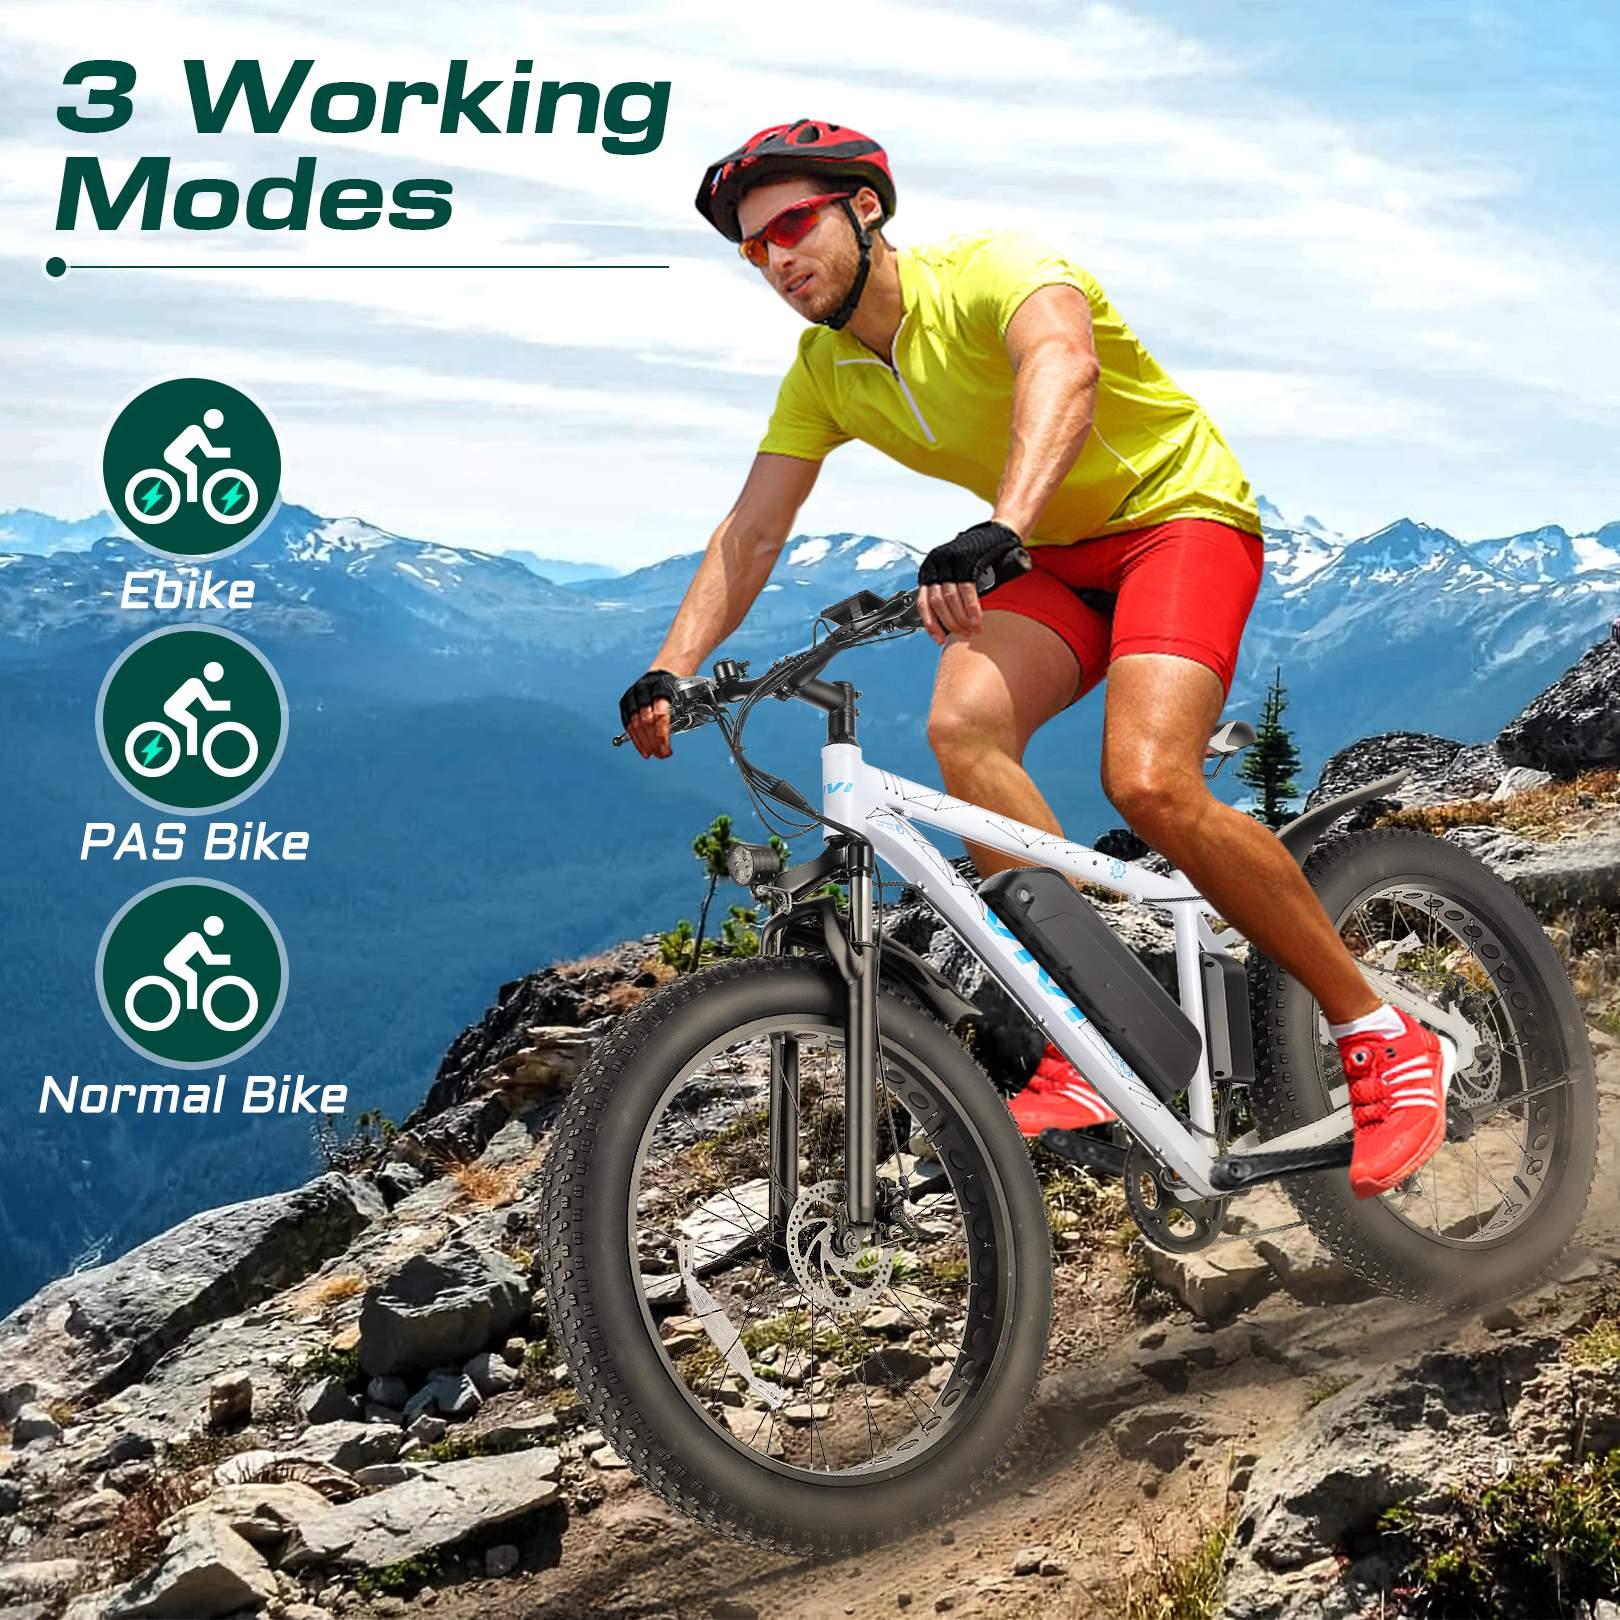 500W 26inch 48V/12.5Ah Adult E-bike Bicycle  7 Speed Electric Commuter Mountain Bike Disc Brake Lithium Battery